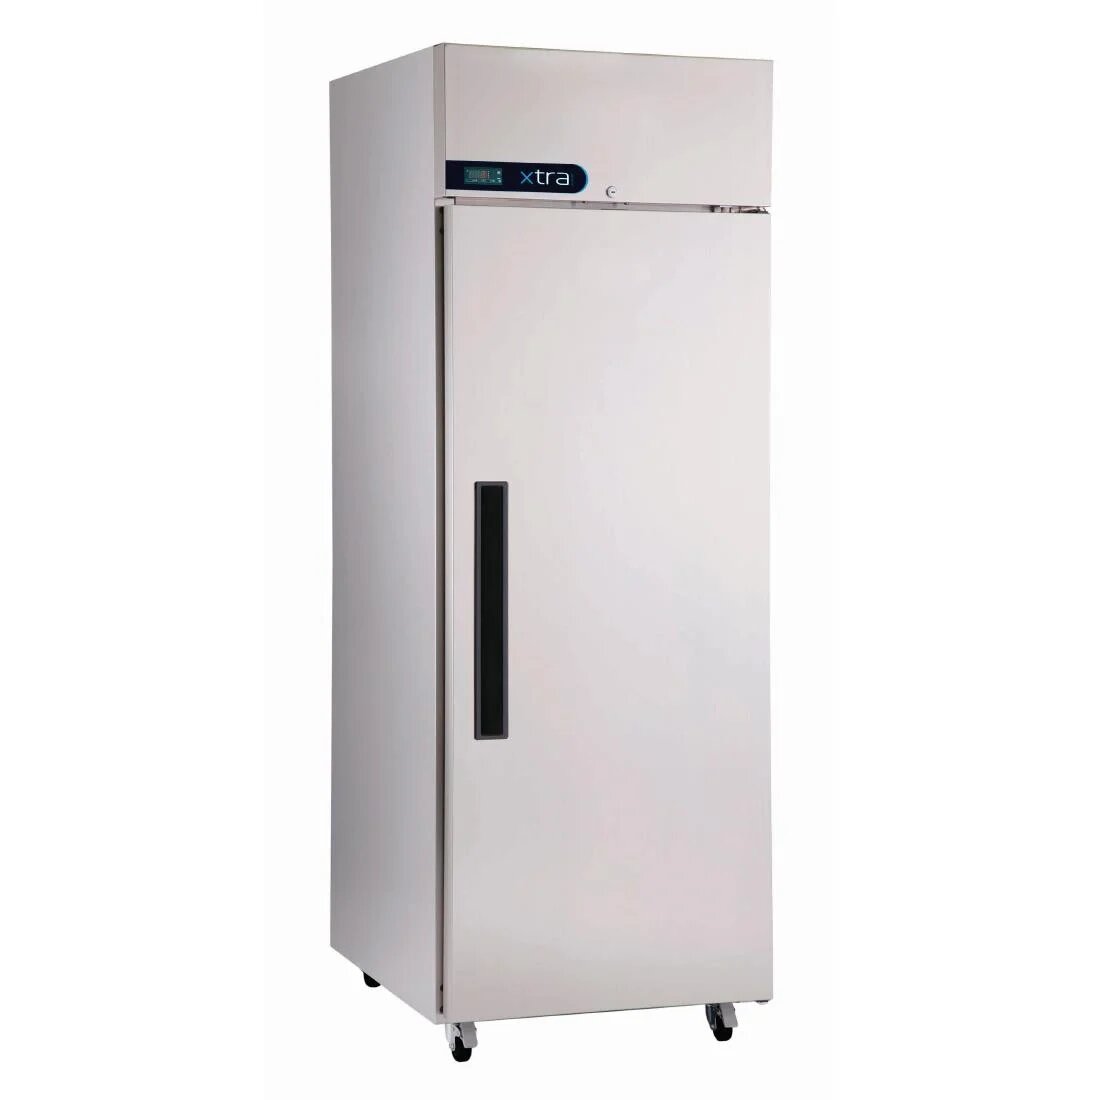 Foster Xtra XR600H Stainless Steel Upright Fridge